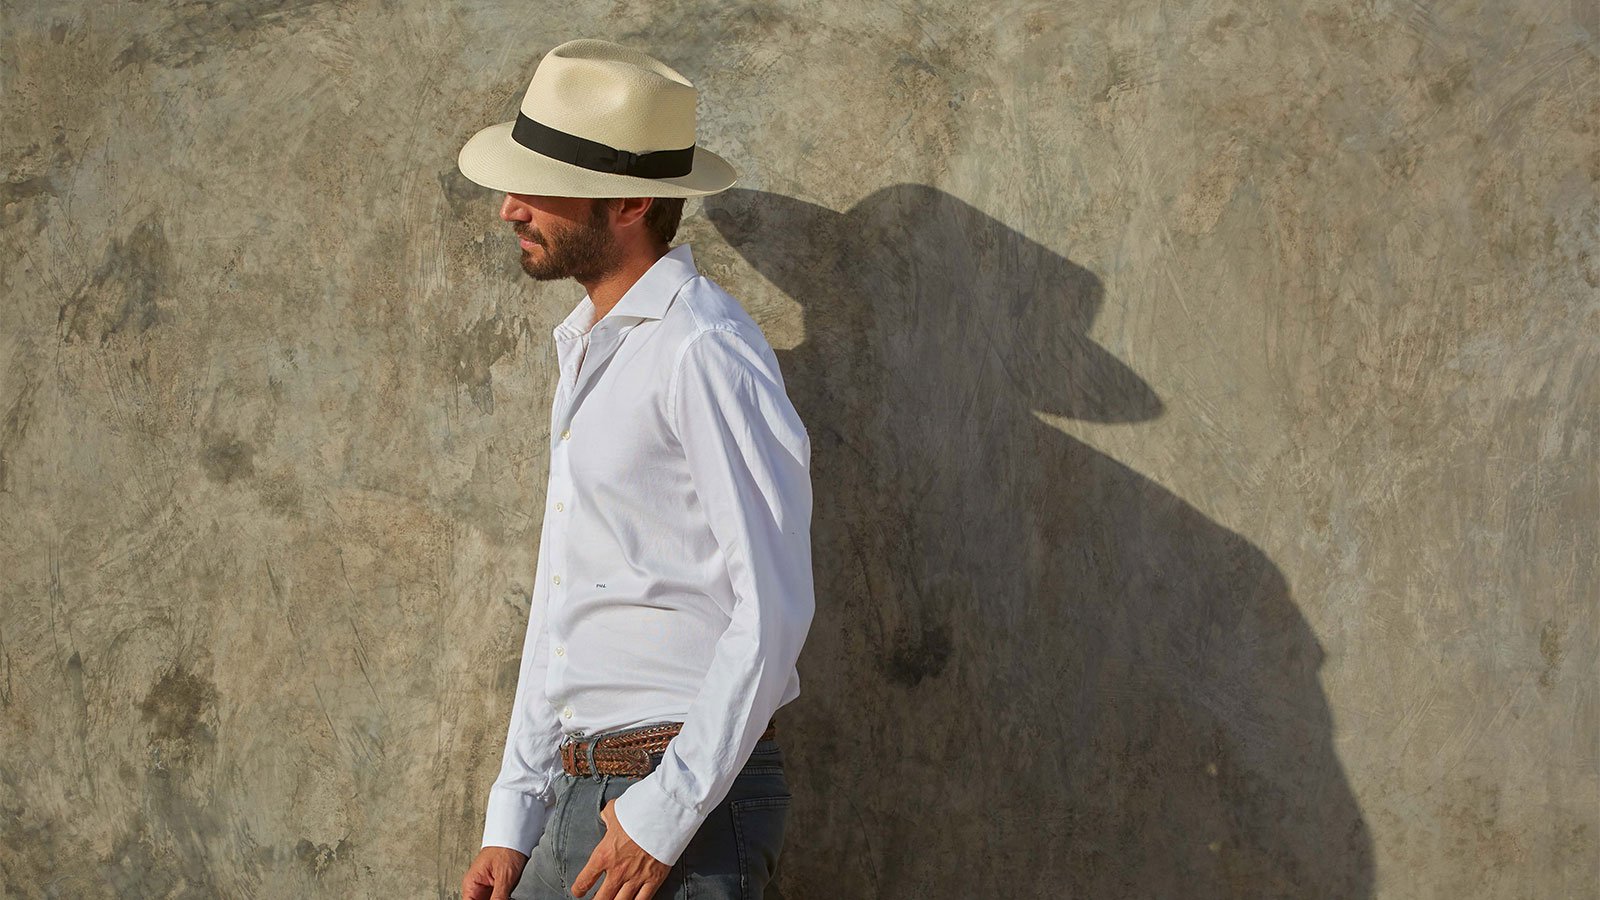 Design
Rarer than a perfect diamond and infinitely more refined, we are proud to carry the most exquisitely crafted Montecristi Panama hats in the world. Depending on the quality of the weave, a Worth & Worth Montecristi Panama Hat can take several months to weave by our master weavers in Ecuador. Available in four different qualities, the result is a hat with soft texture, translucent appearance and luminous ivory color.
Material
Montecristi Panama straw handwoven in Ecuador available in 4 different qualities: Artisan, Master, Museum and Superfino.
Specifications
With its semi-teardrop Style our Montecristi Havana combines a 3 3/4” to 4crown. The brim can varies from 2 1/8” to 2 3/4” with an average of 2 3/8”. Handwoven by our master weavers in Ecuador Handcrafted in our atelier in NYC. Truly a work of art.